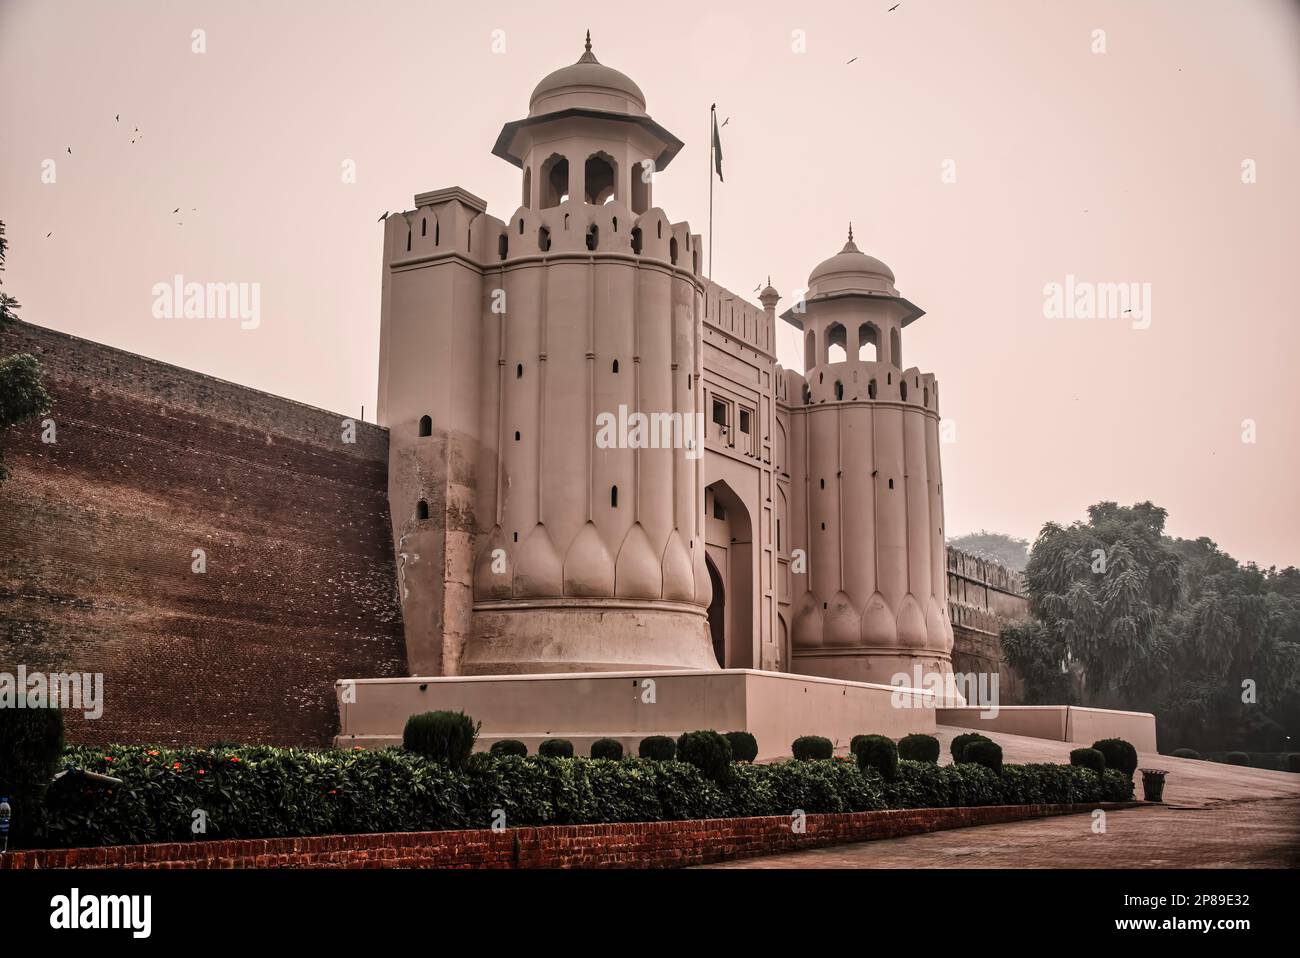 The Alamgiri Darwaza, or Alamgiri Gate, was built under the patronage of Awrangzib (1658-1707). It is situated on the eastern edge of the Lahore Fort, Stock Photo